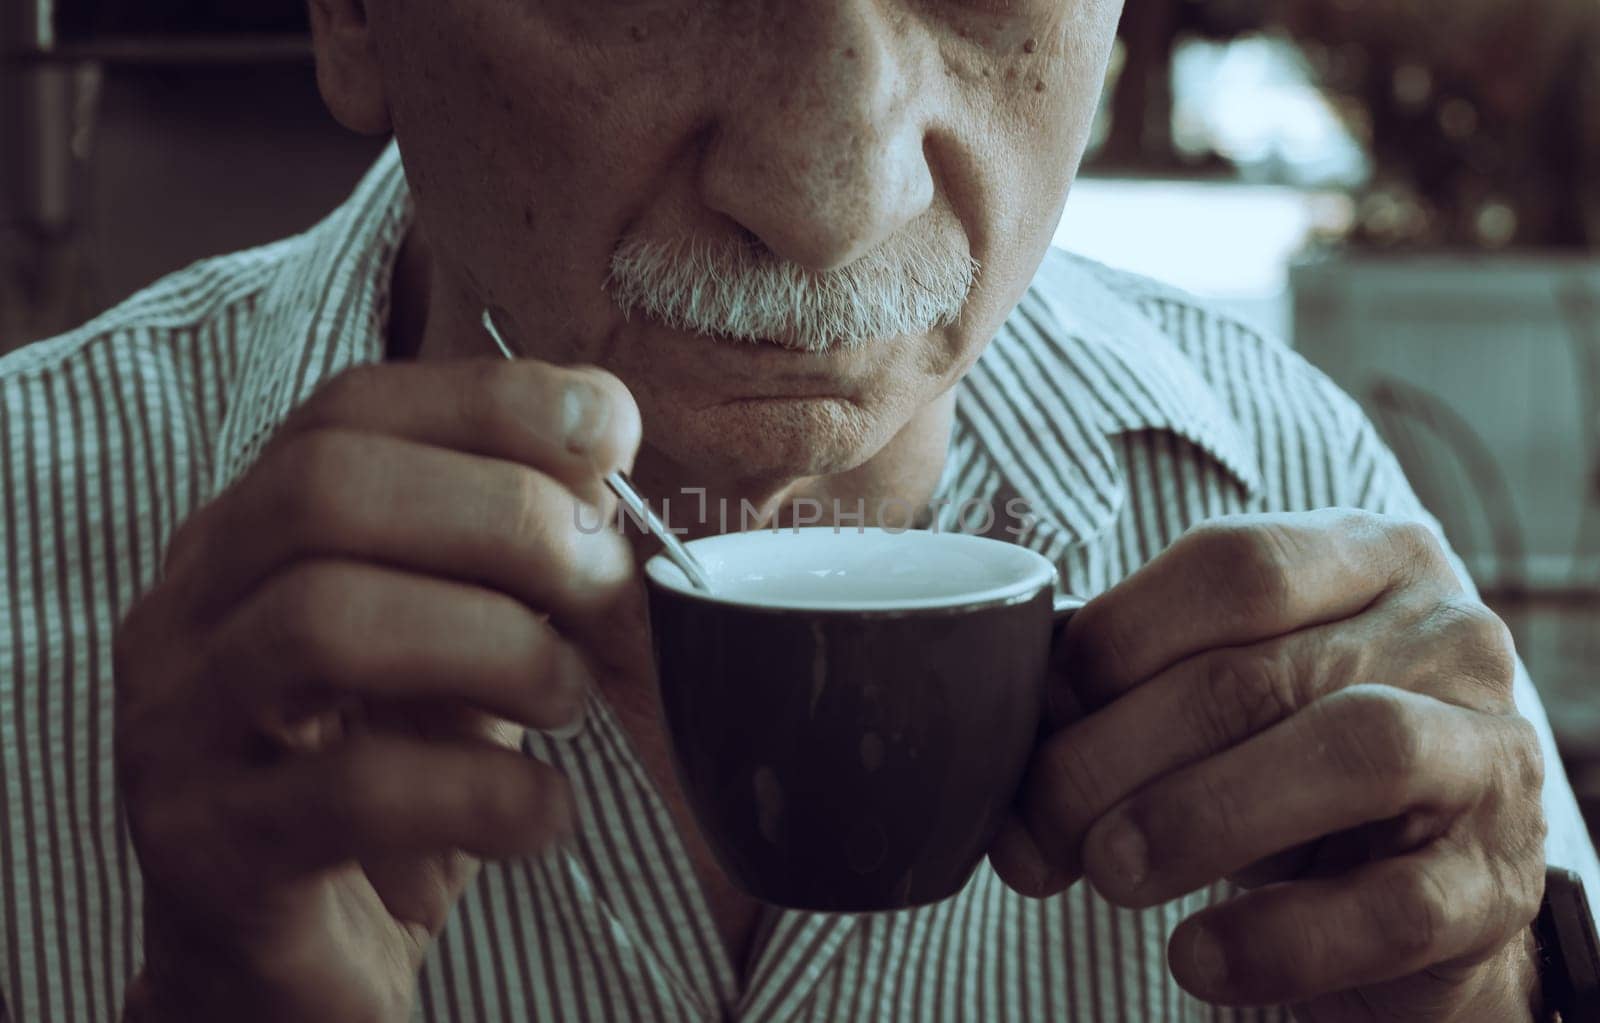 Lifestyle concept. An elderly man drinking espresso coffee at an outdoor cafe in the early hours of the morning before work.
